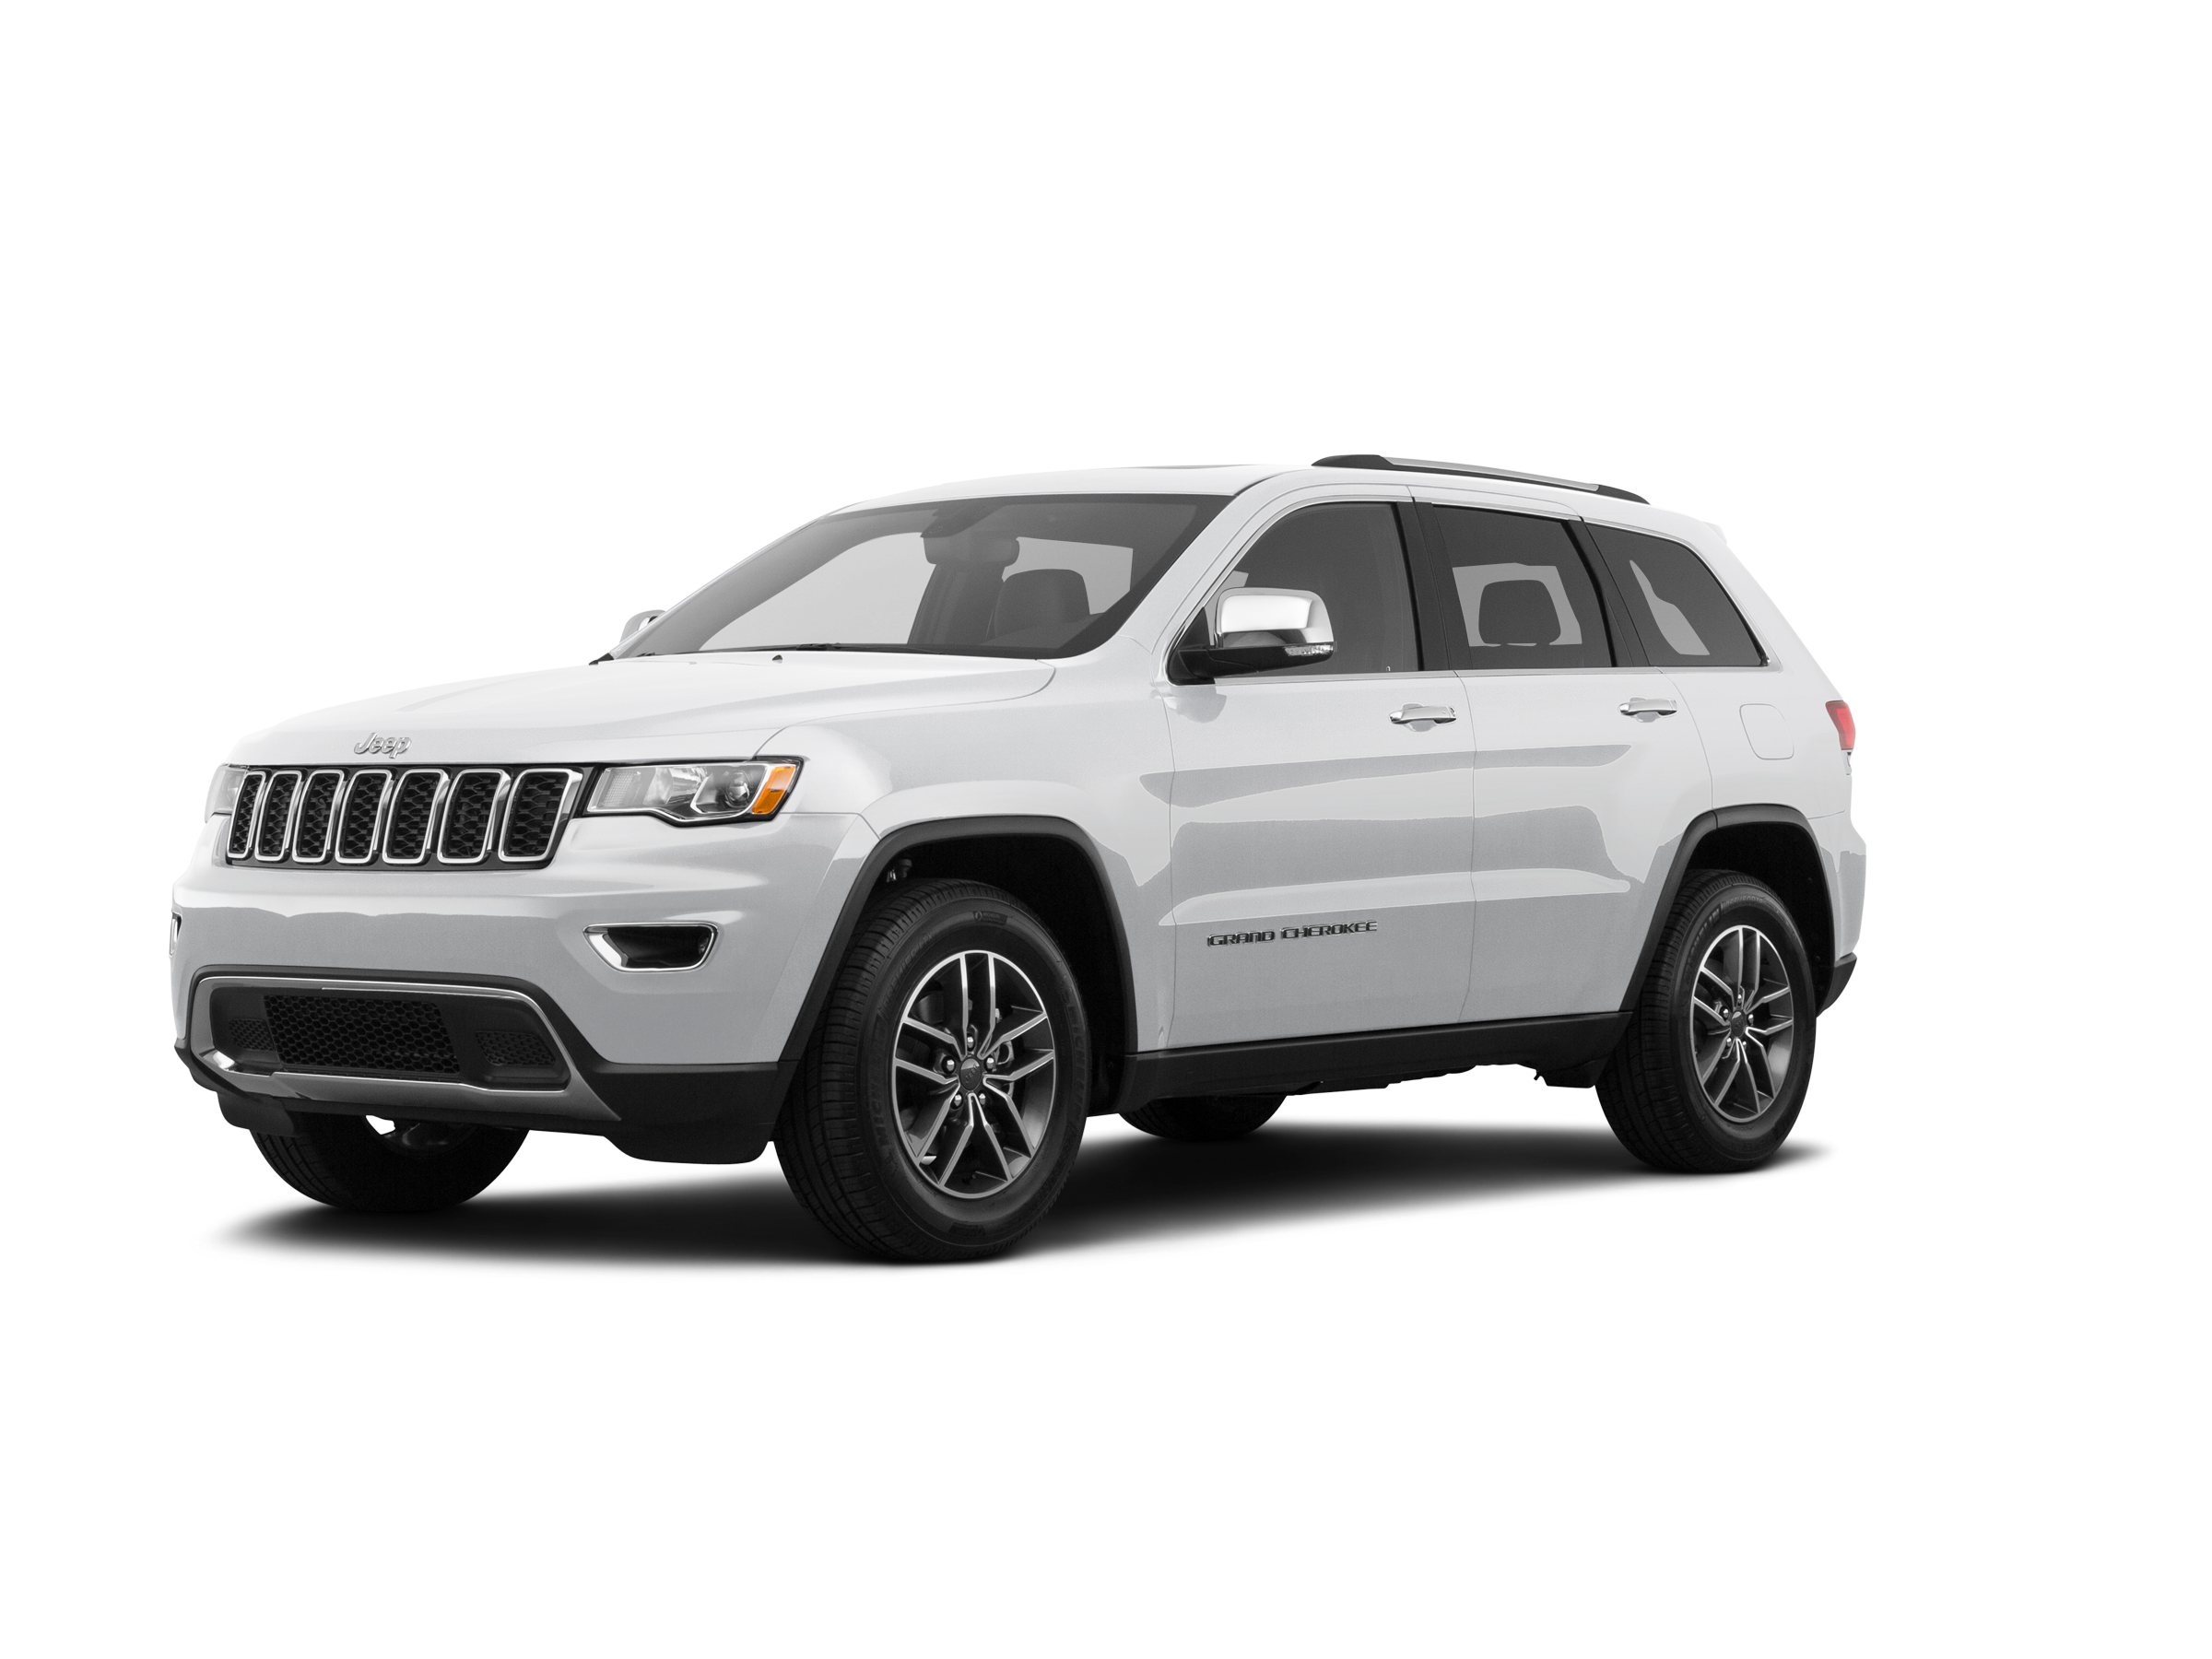 Competitief Uitrusten Kiwi 2021 Jeep Grand Cherokee Values & Cars for Sale | Kelley Blue Book